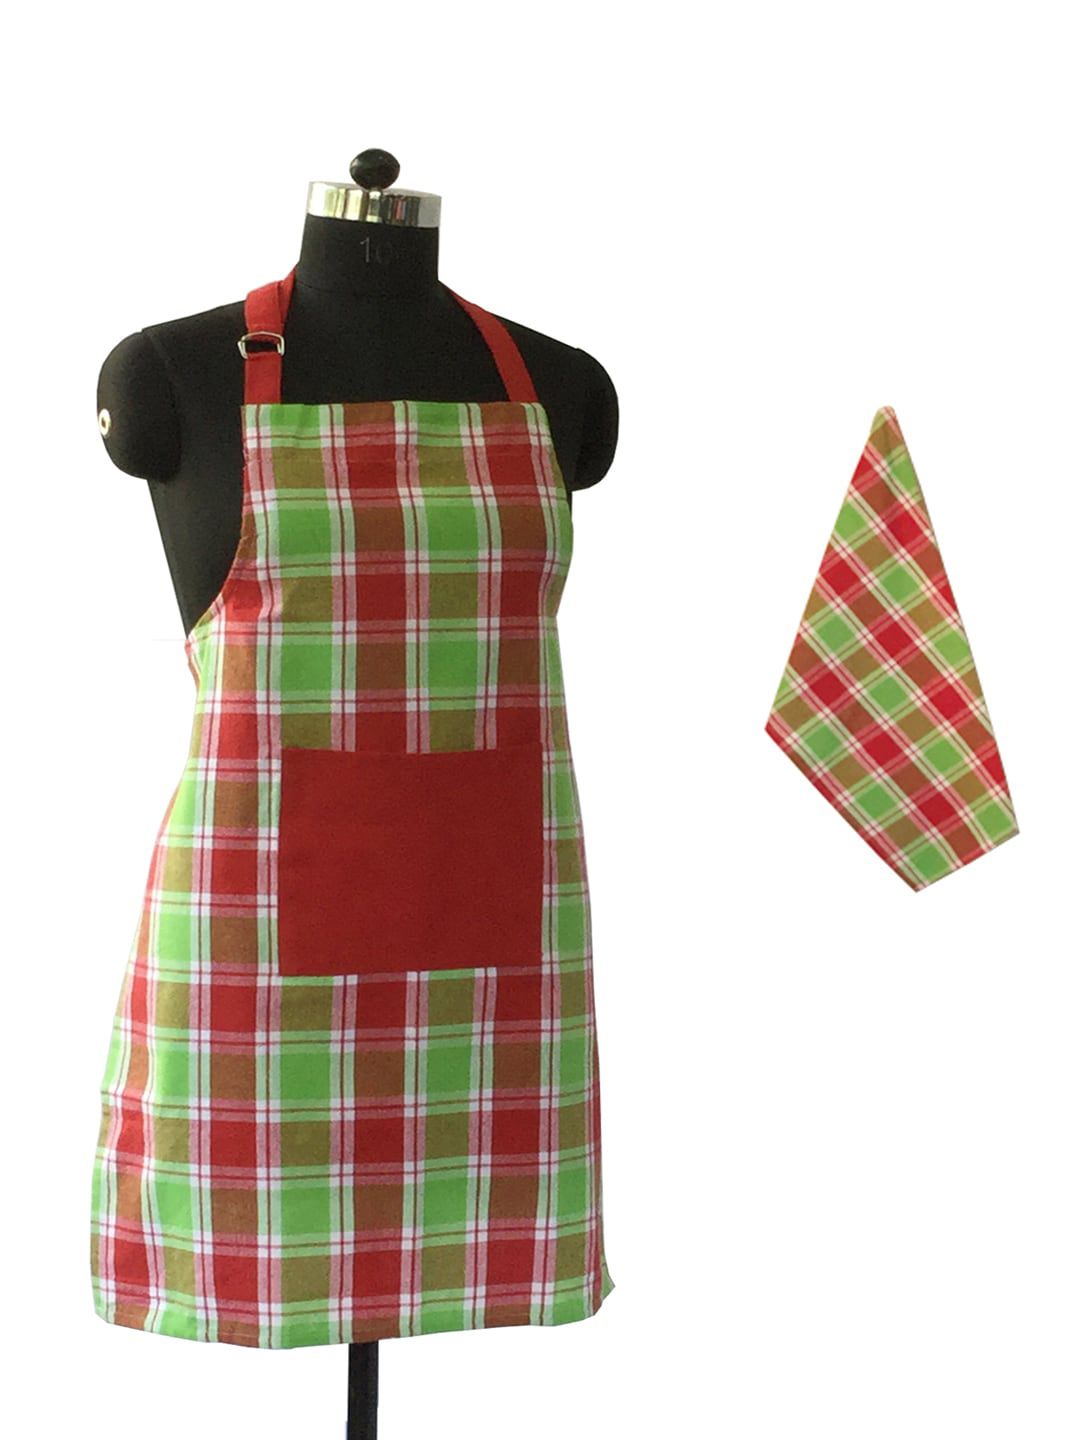 Lushomes Red & Green Checked Cotton 2-Piece Kitchen Apron Set Price in India